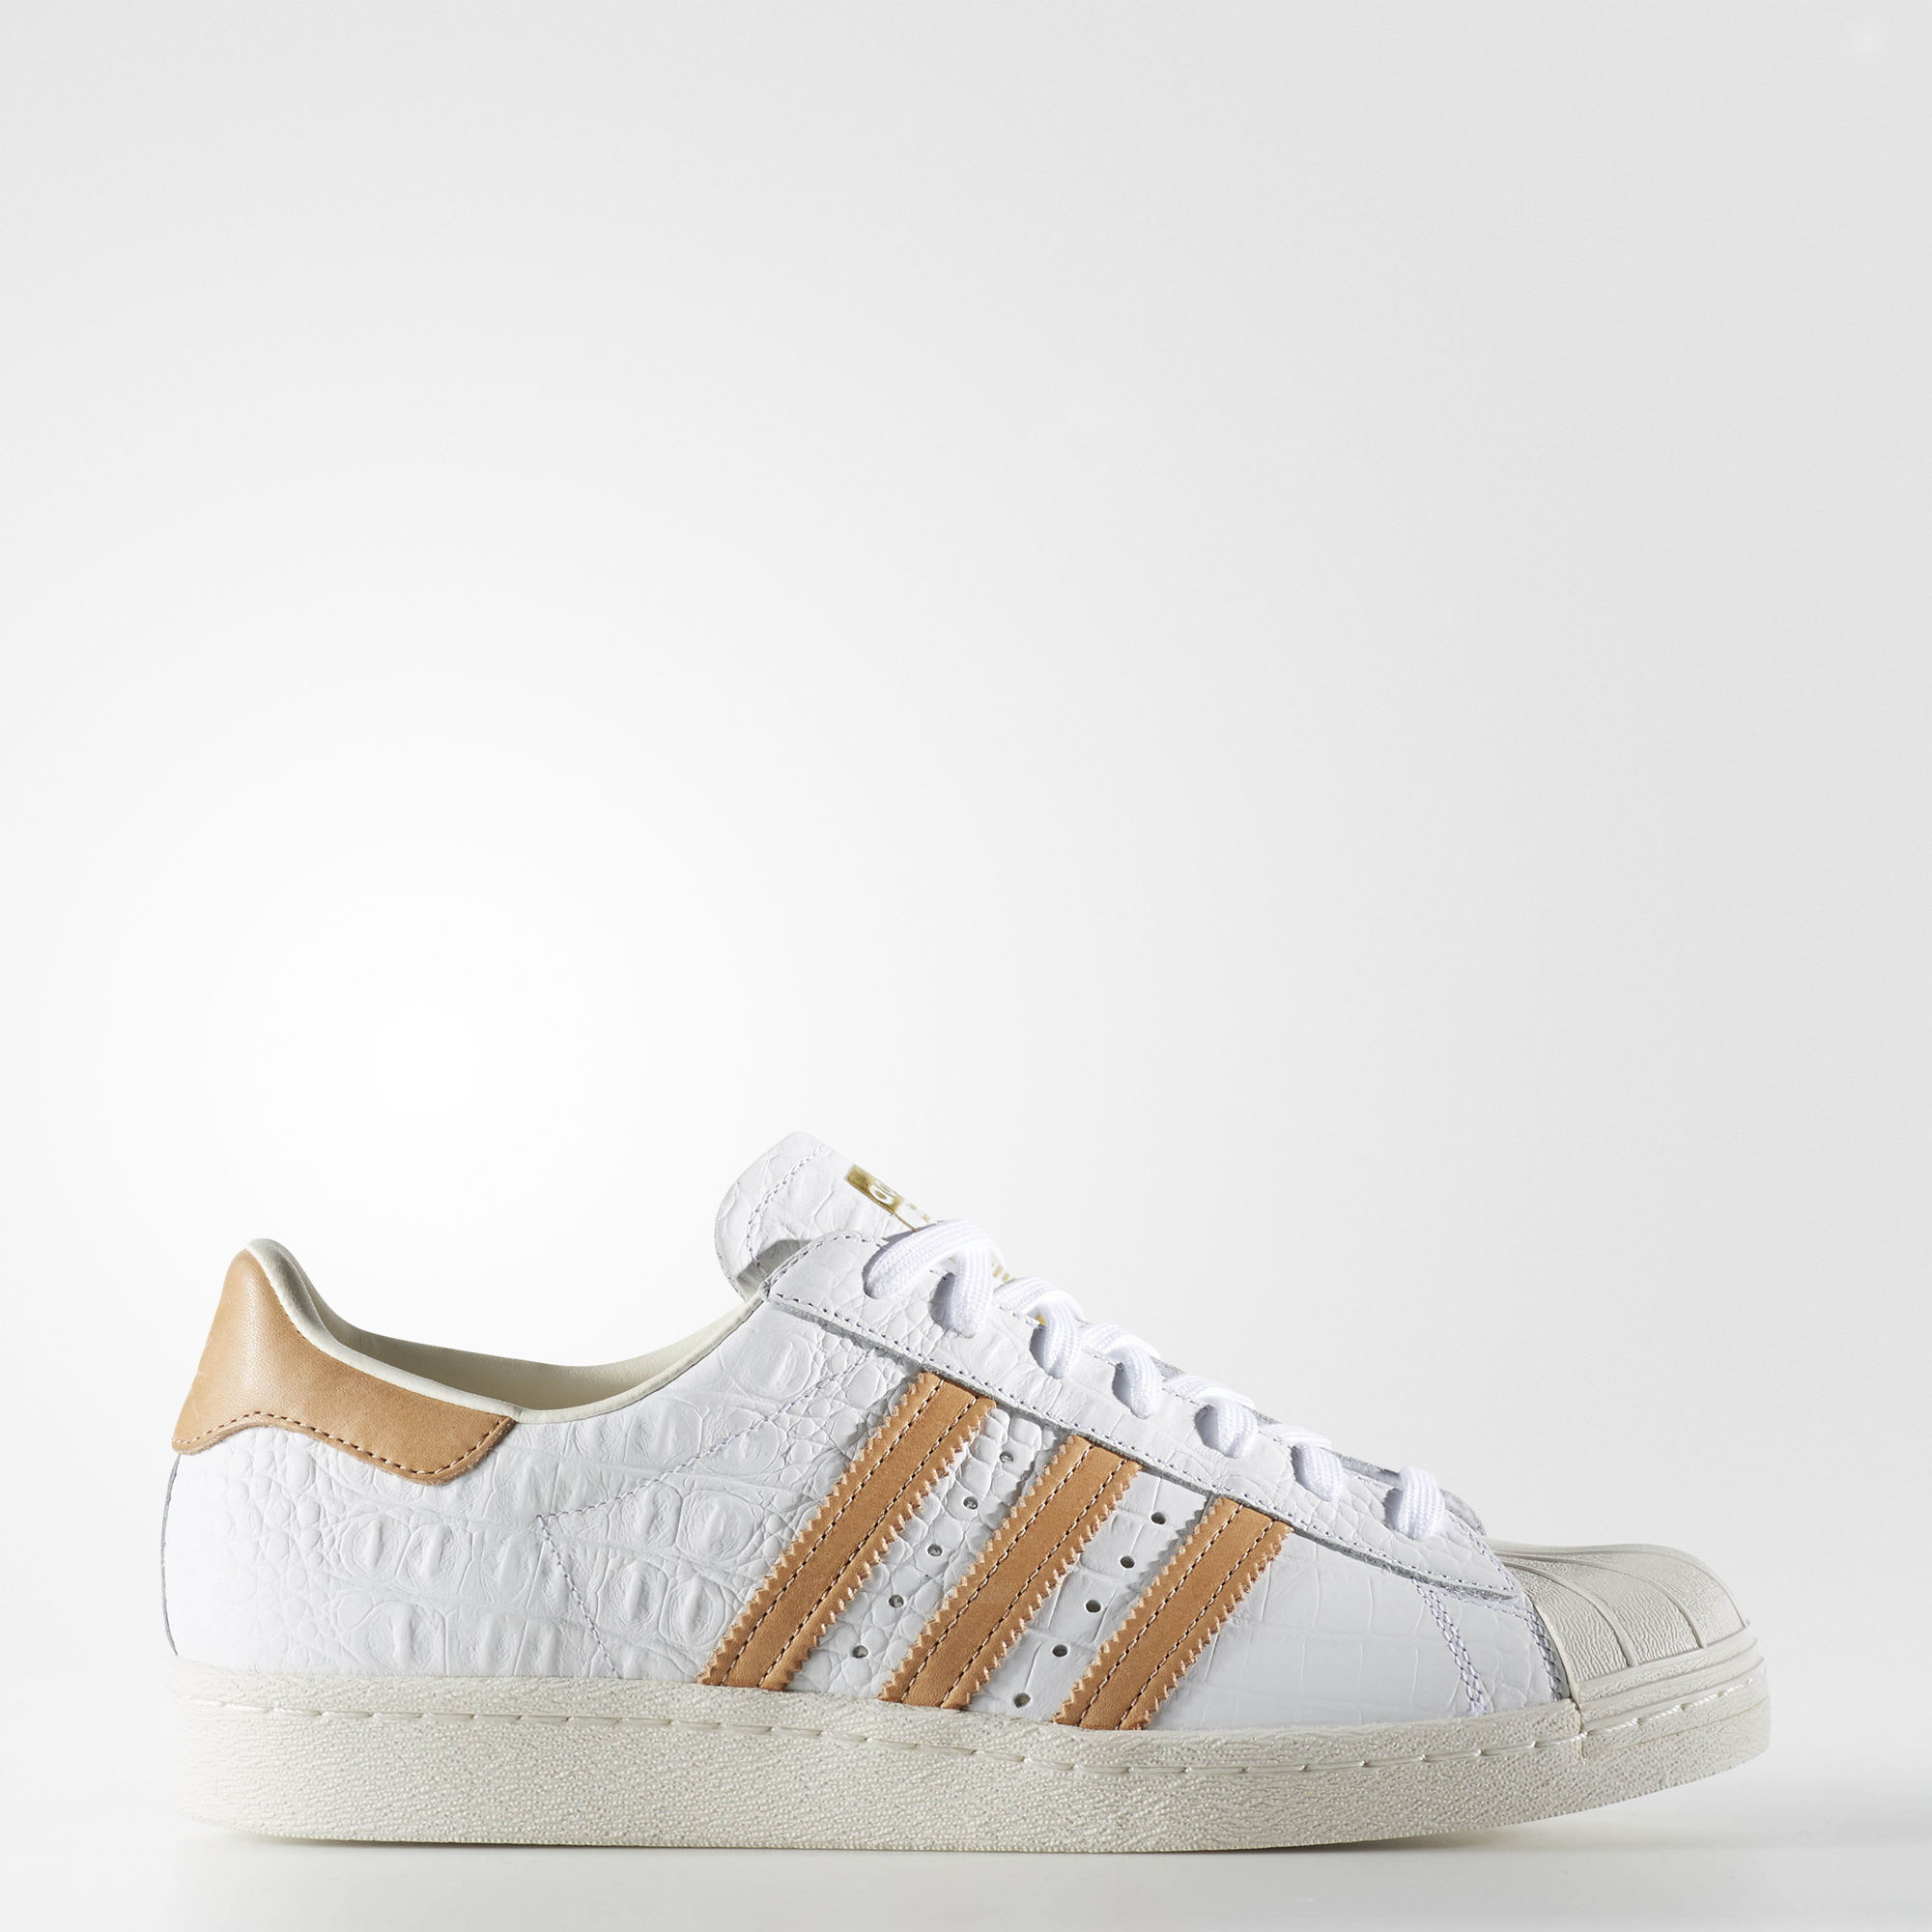 Adidas Superstar 80s men's shoes for 